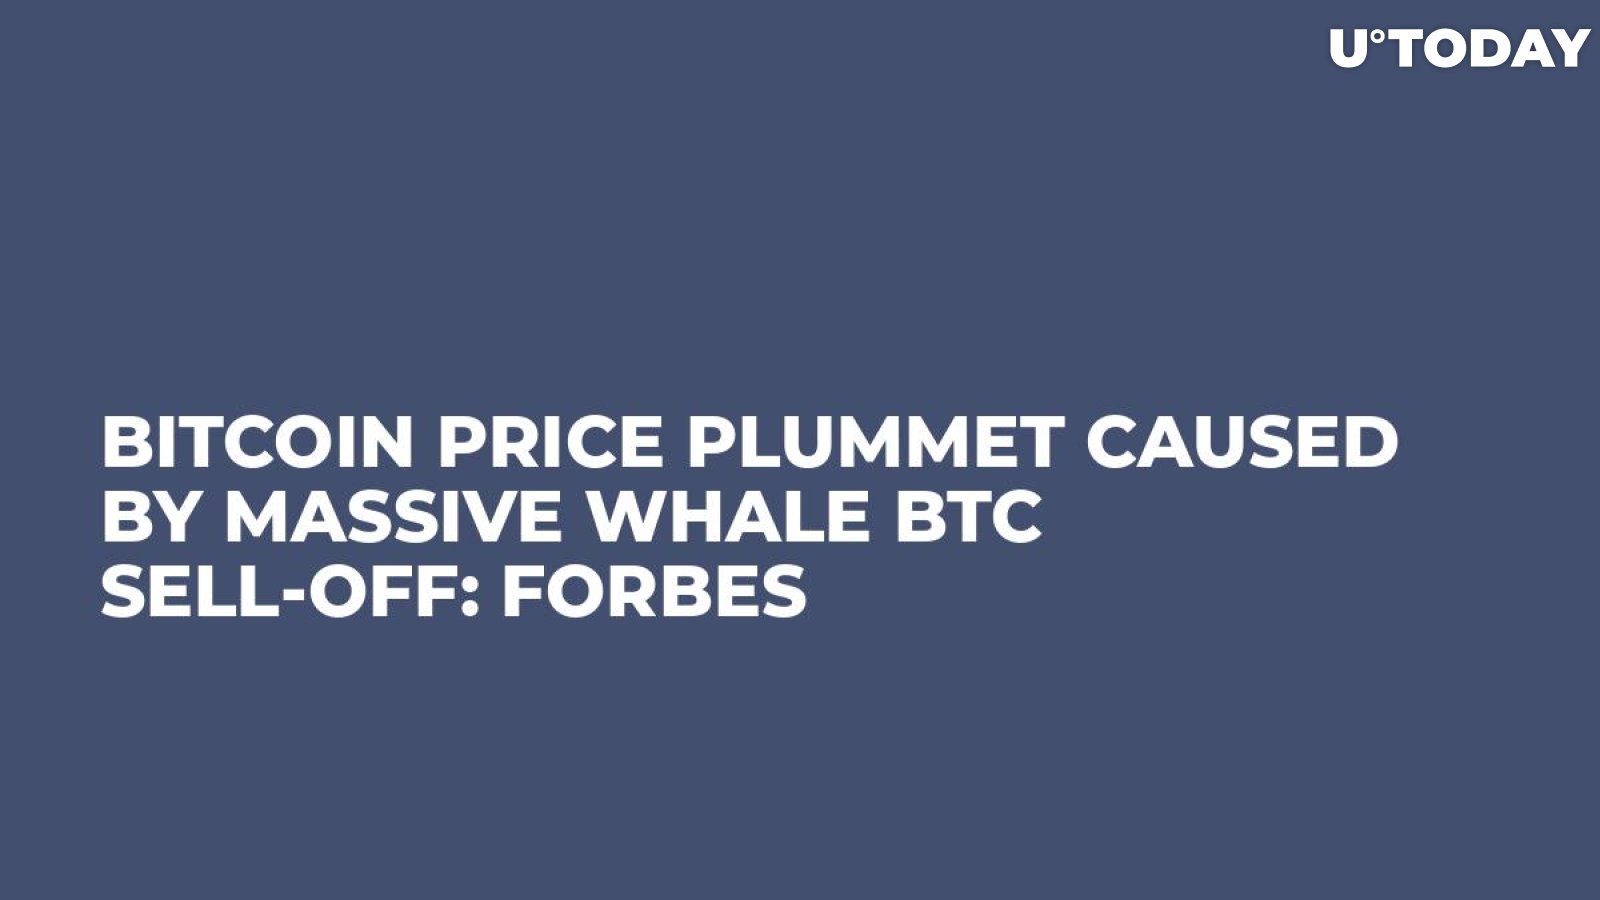 Bitcoin Price Plummet Caused by Massive Whale BTC Sell-Off: Forbes